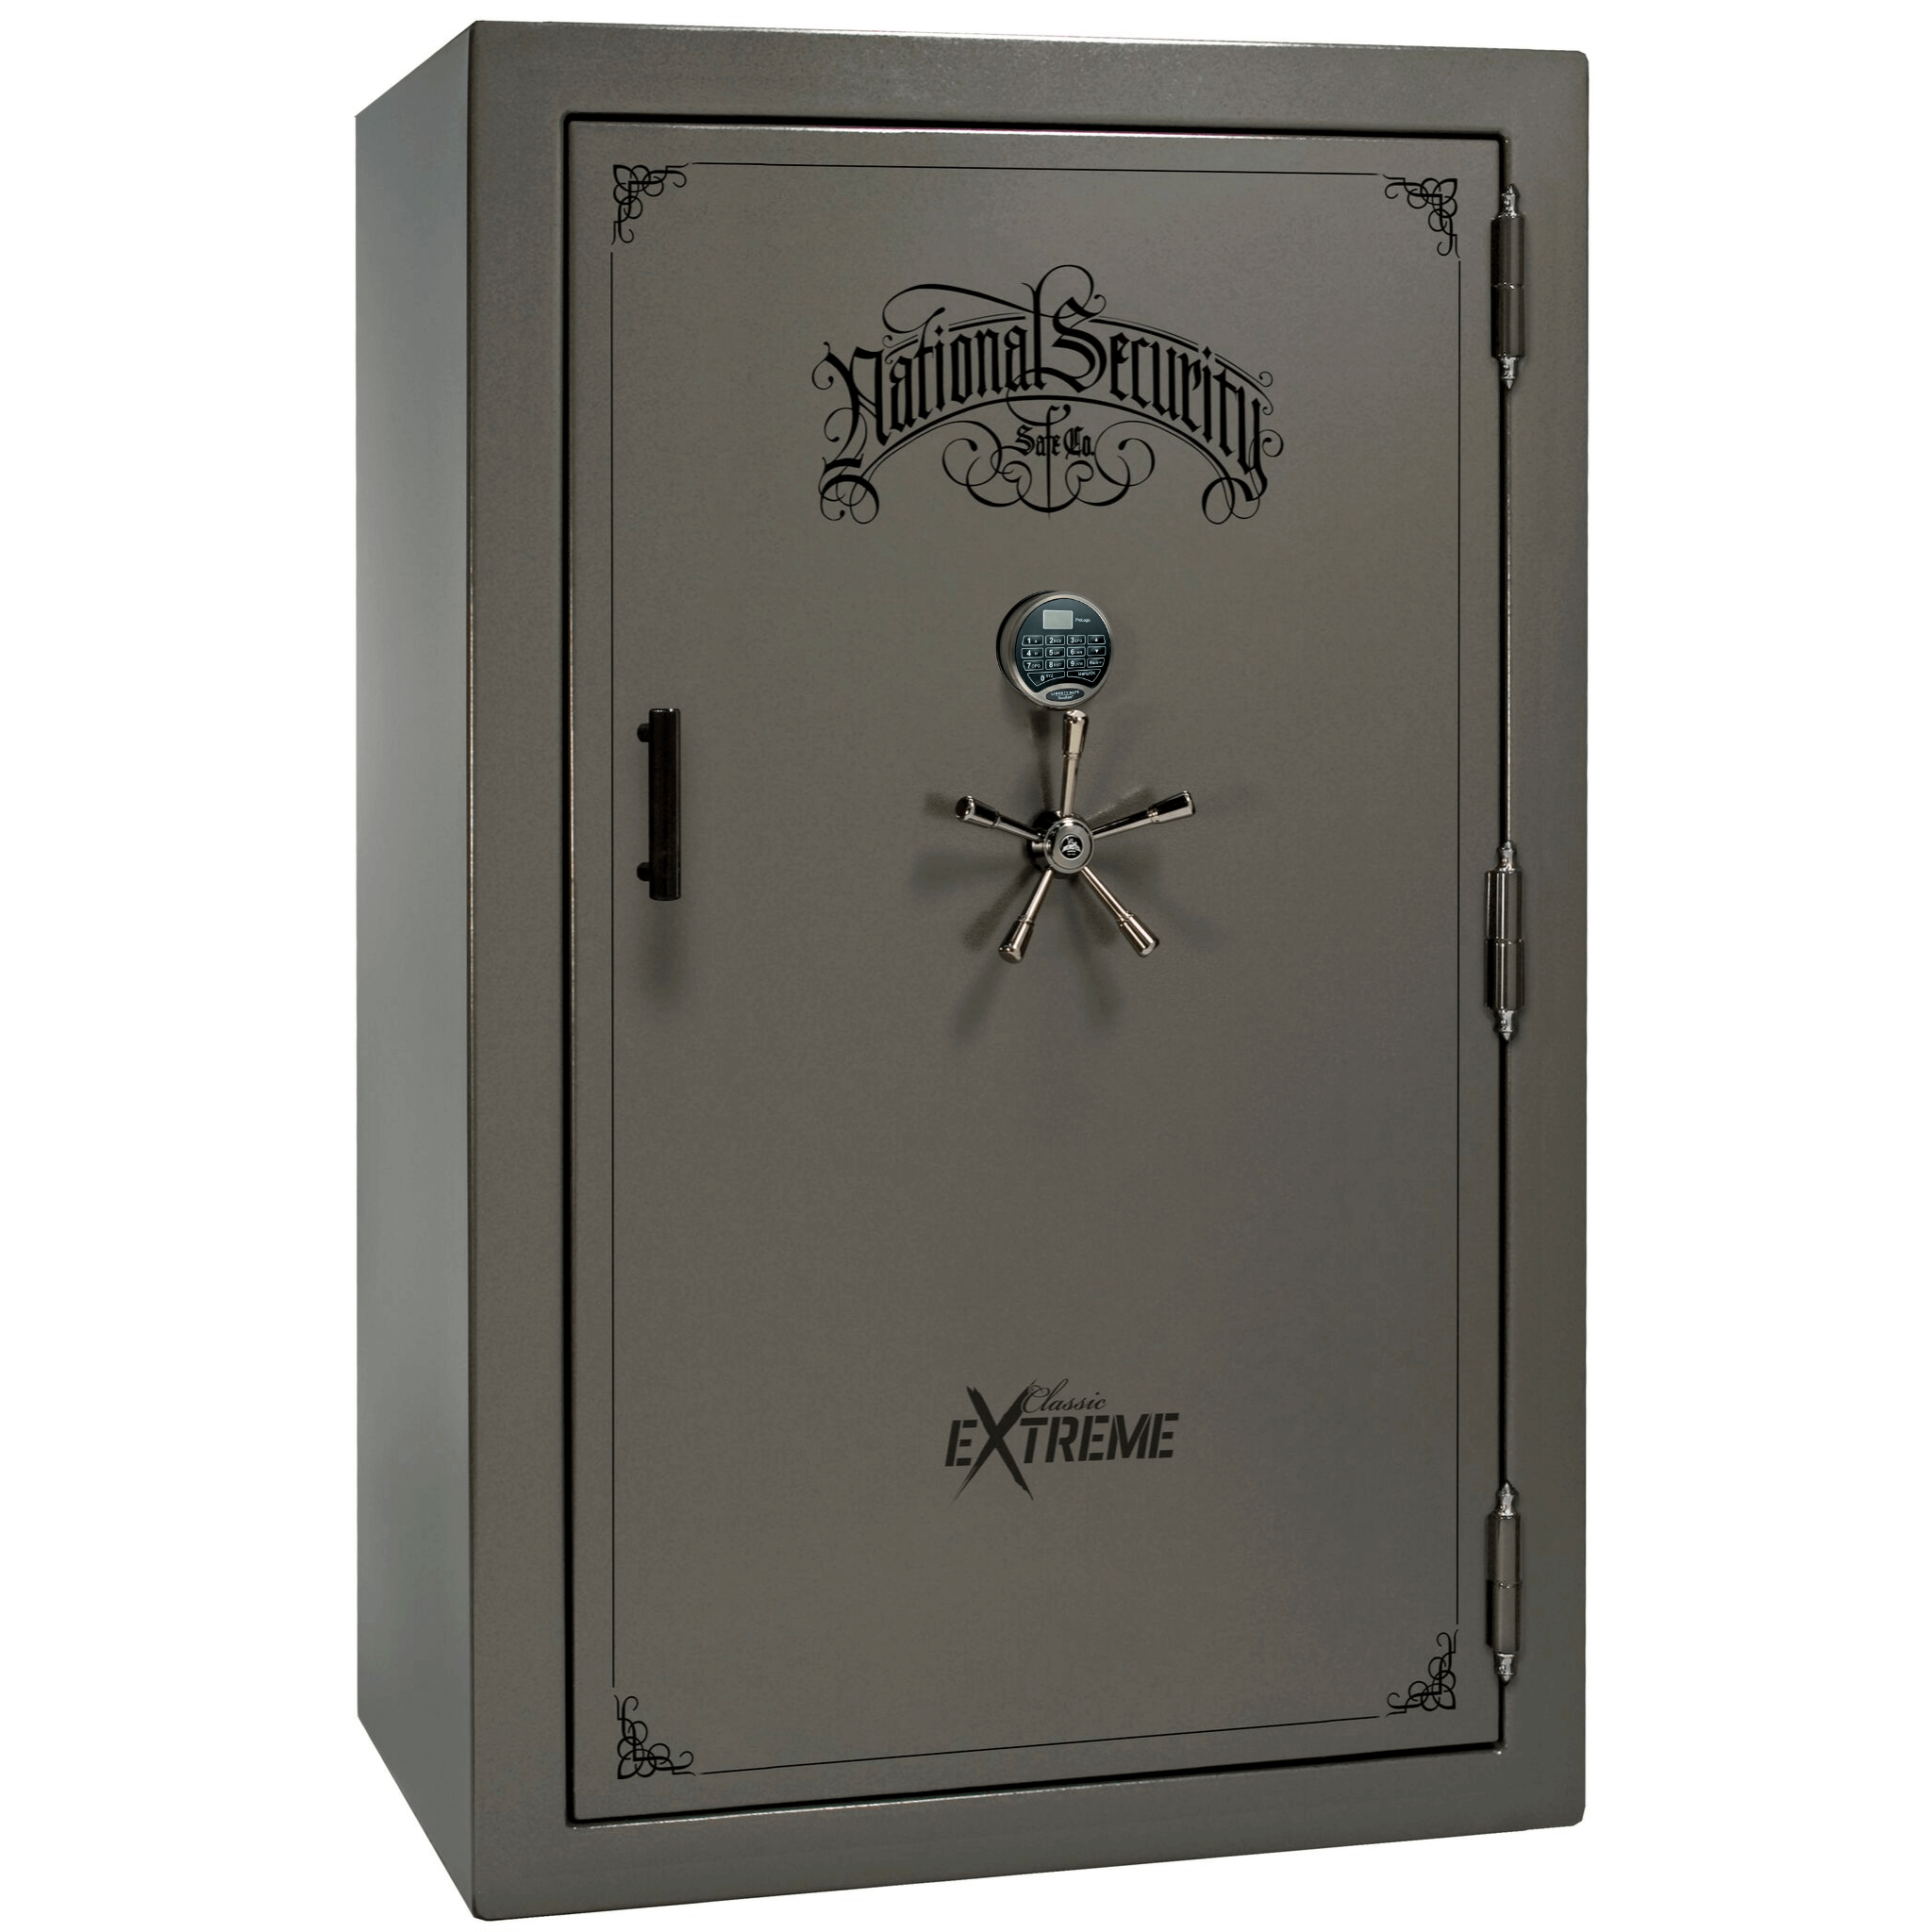 Liberty National Classic Select 60 Extreme Gun Safe with Electronic Lock, photo 21